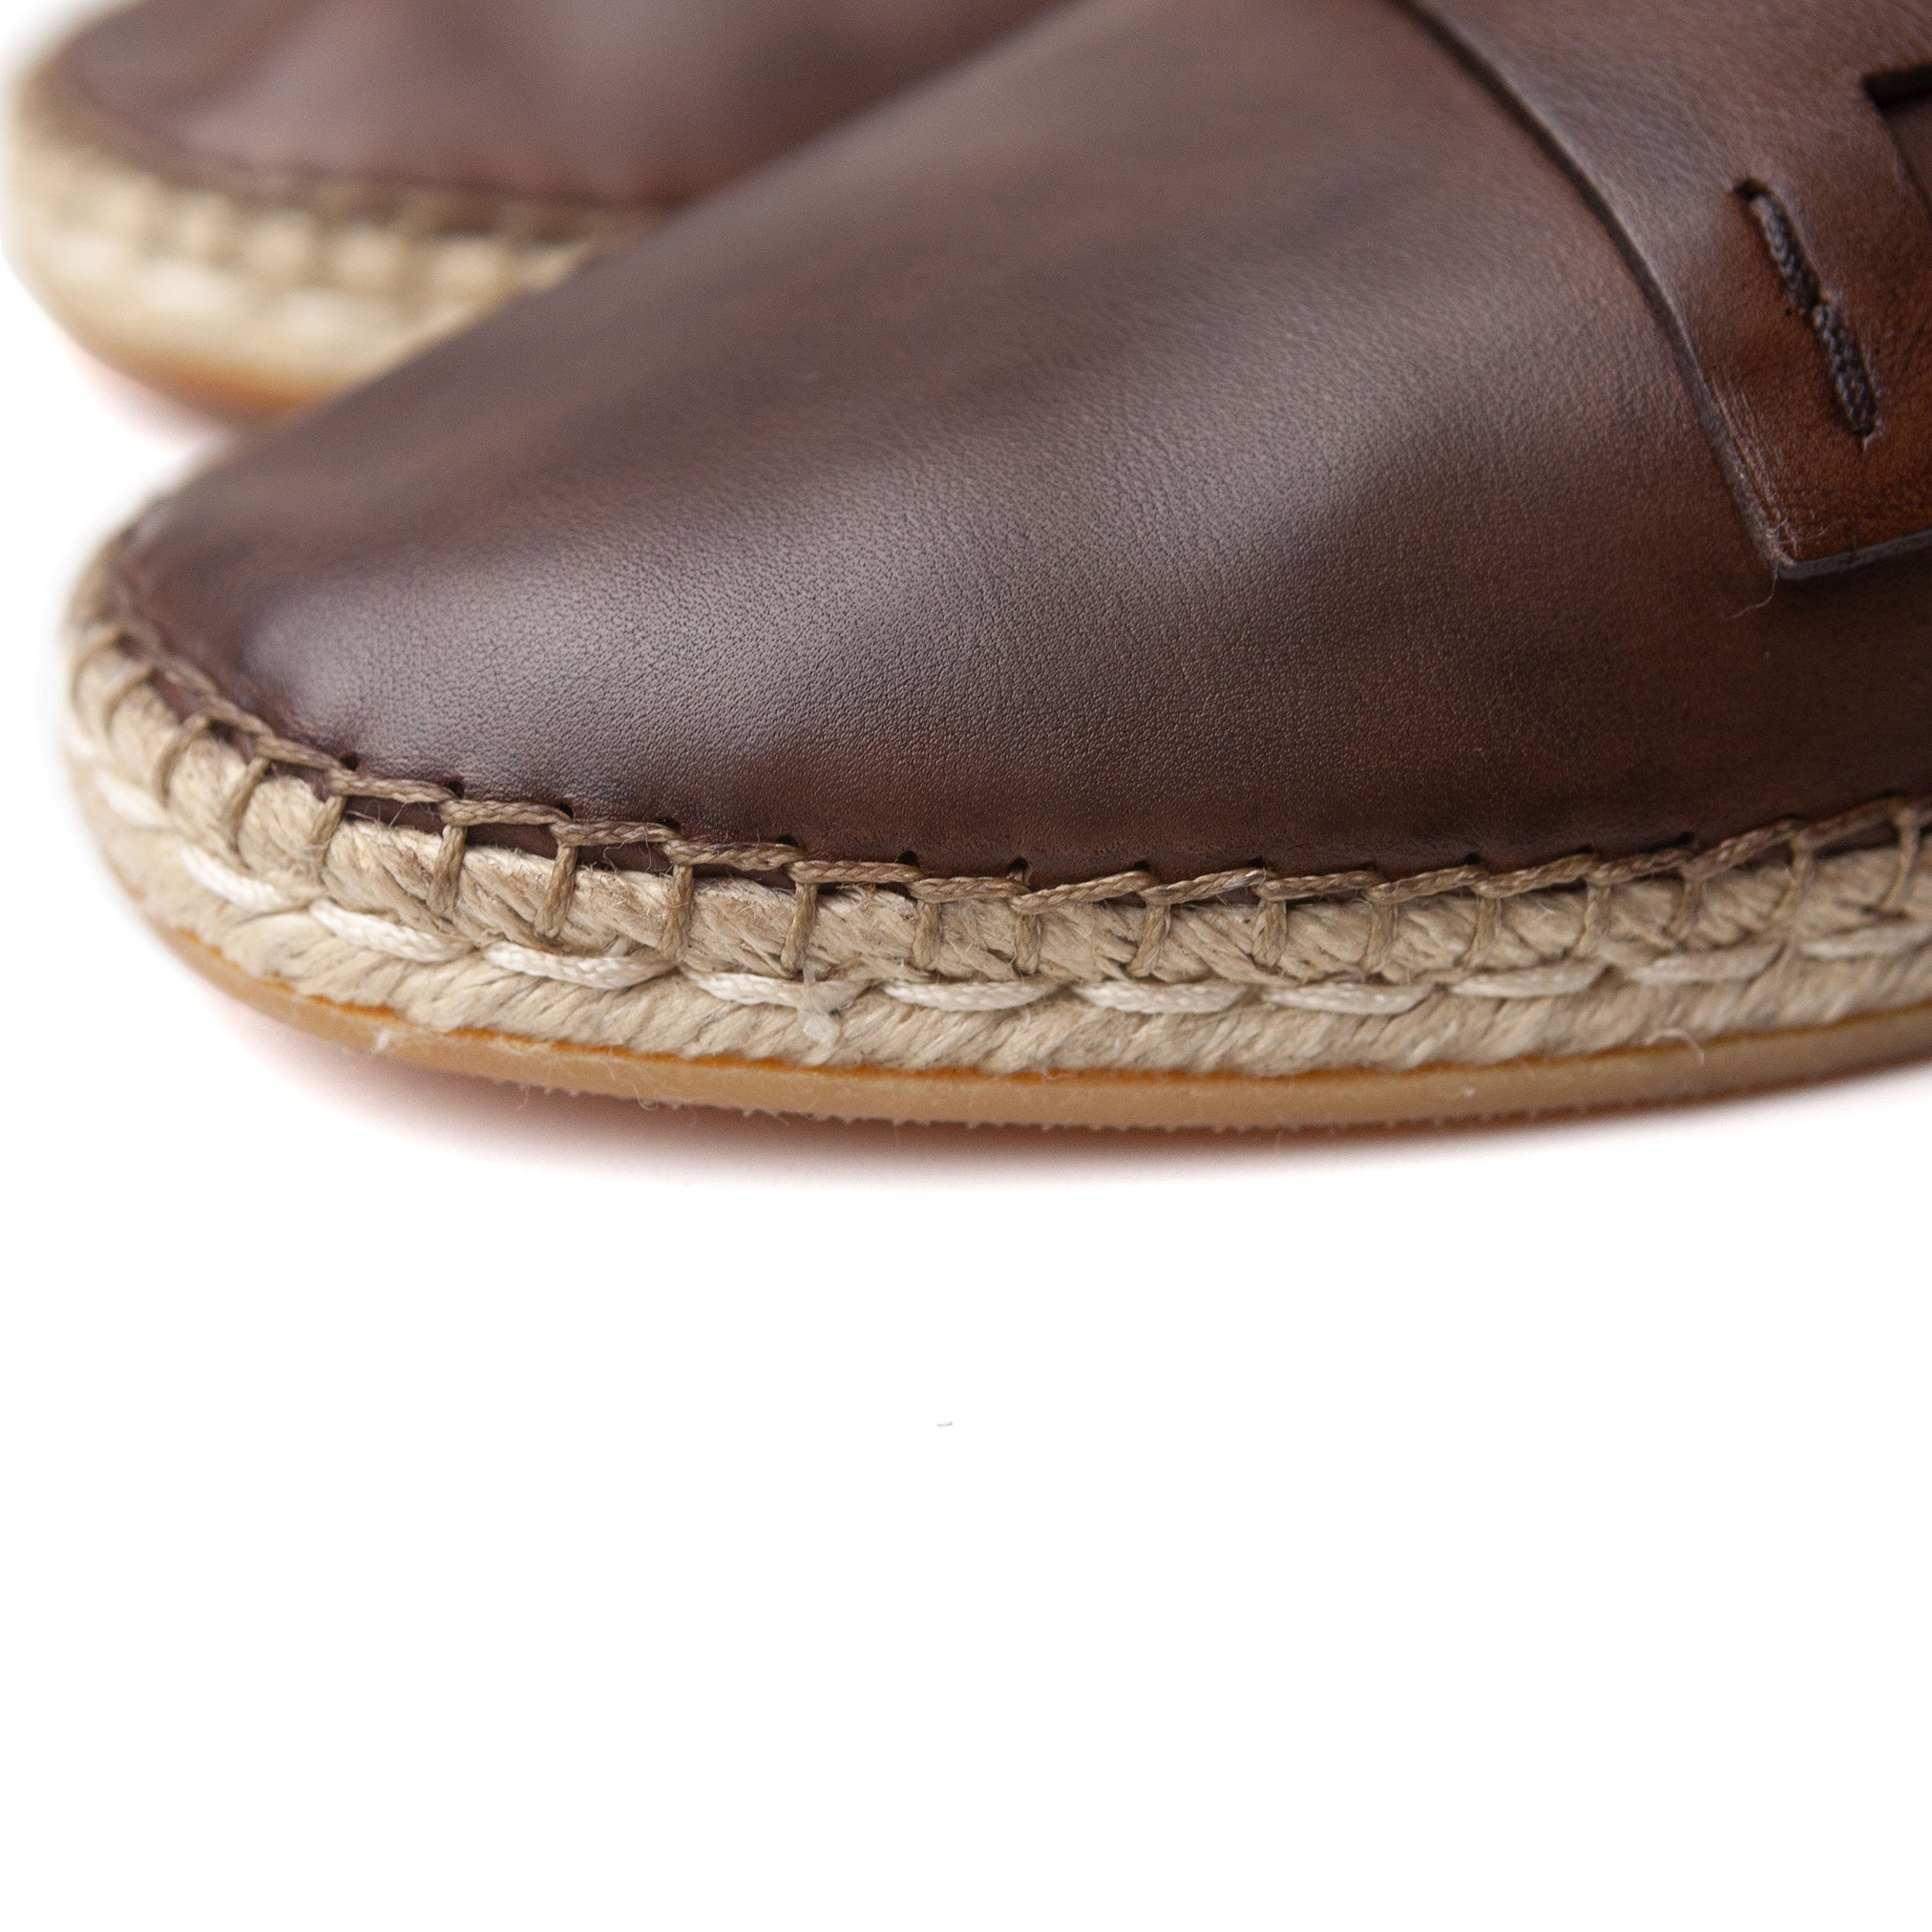 Brown Leather Espadrilles (41.5)